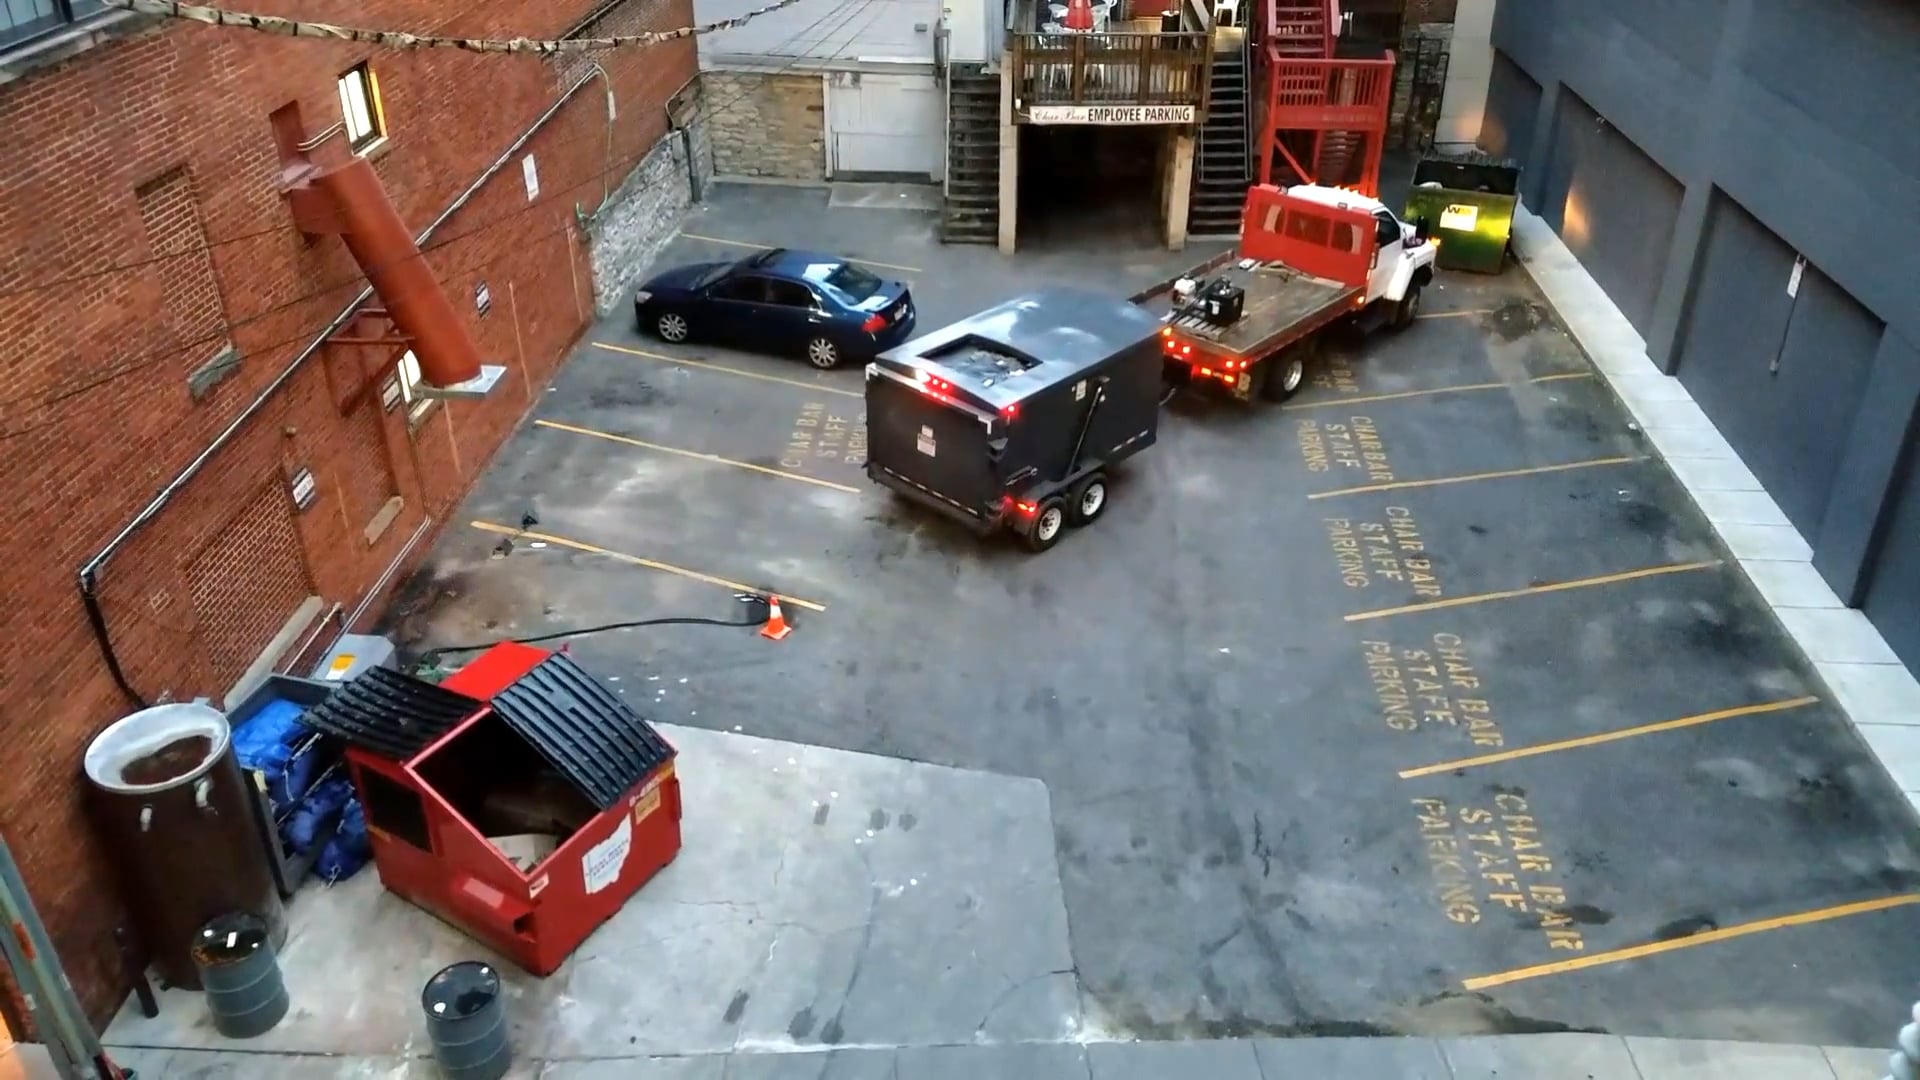 Qube Trailer compactor servicing a Chute in an alley